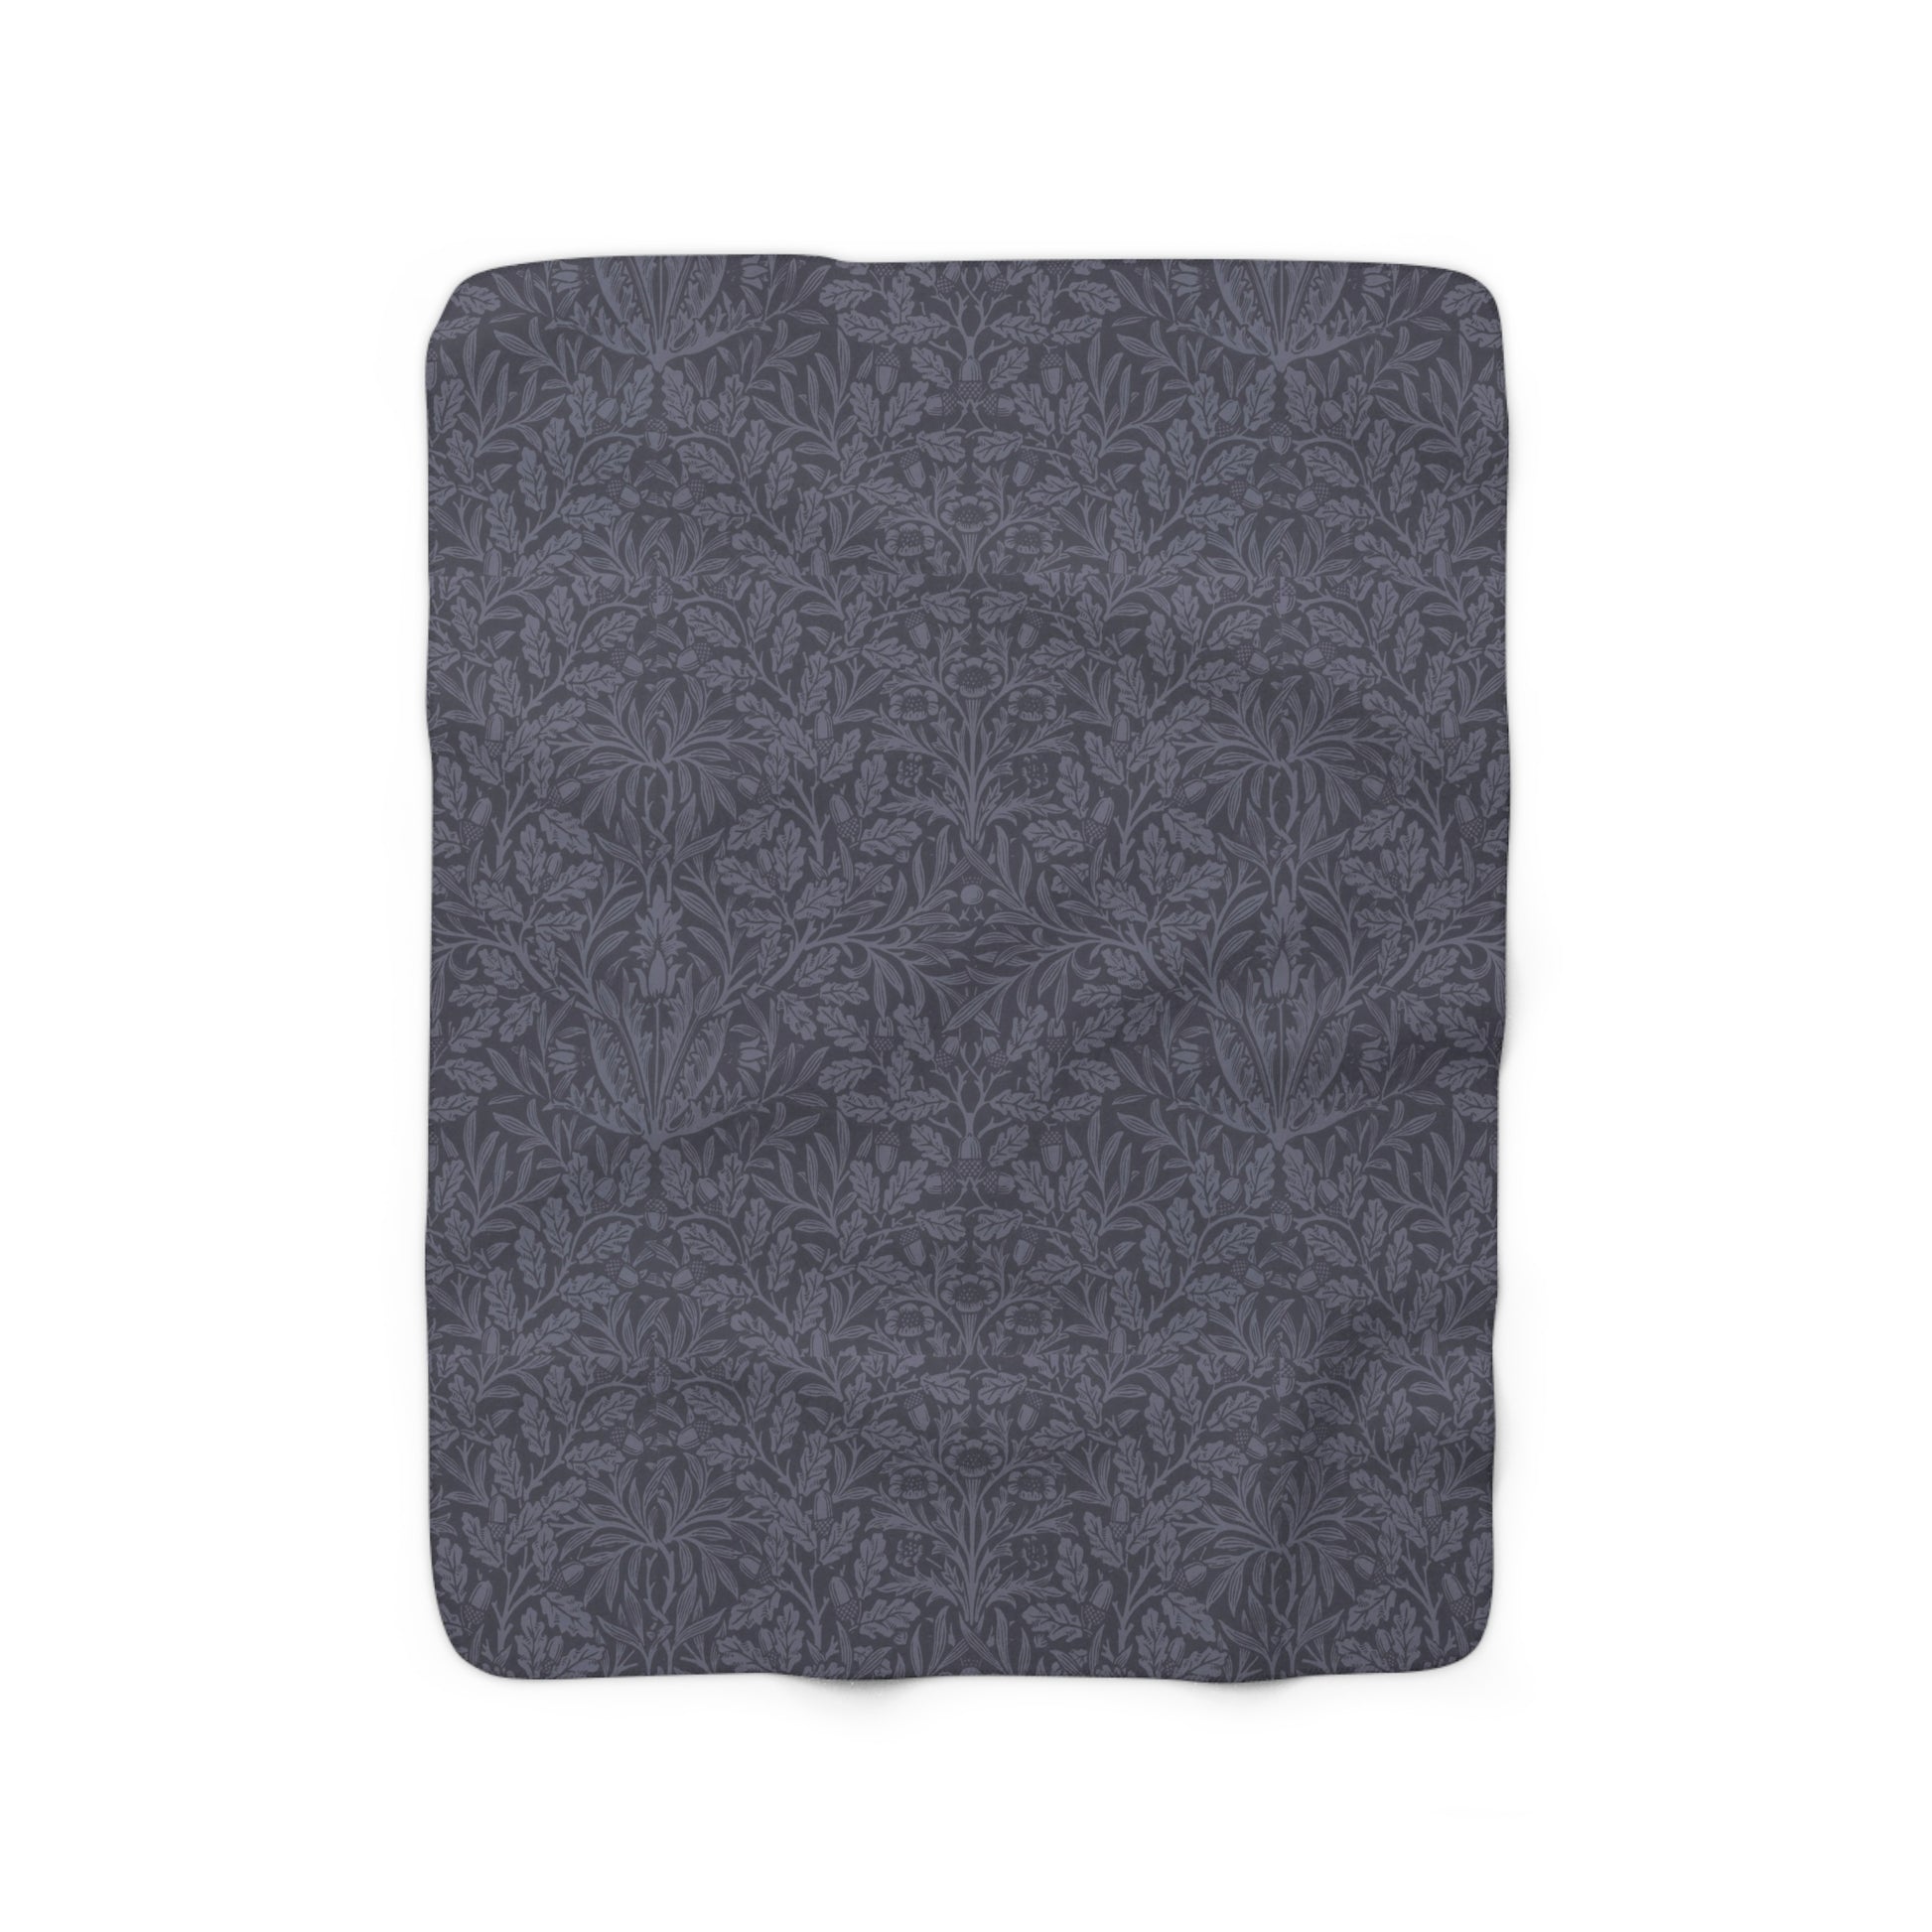 william-morris-co-sherpa-fleece-blanket-acorn-and-oak-leaves-collection-smoky-blue-5